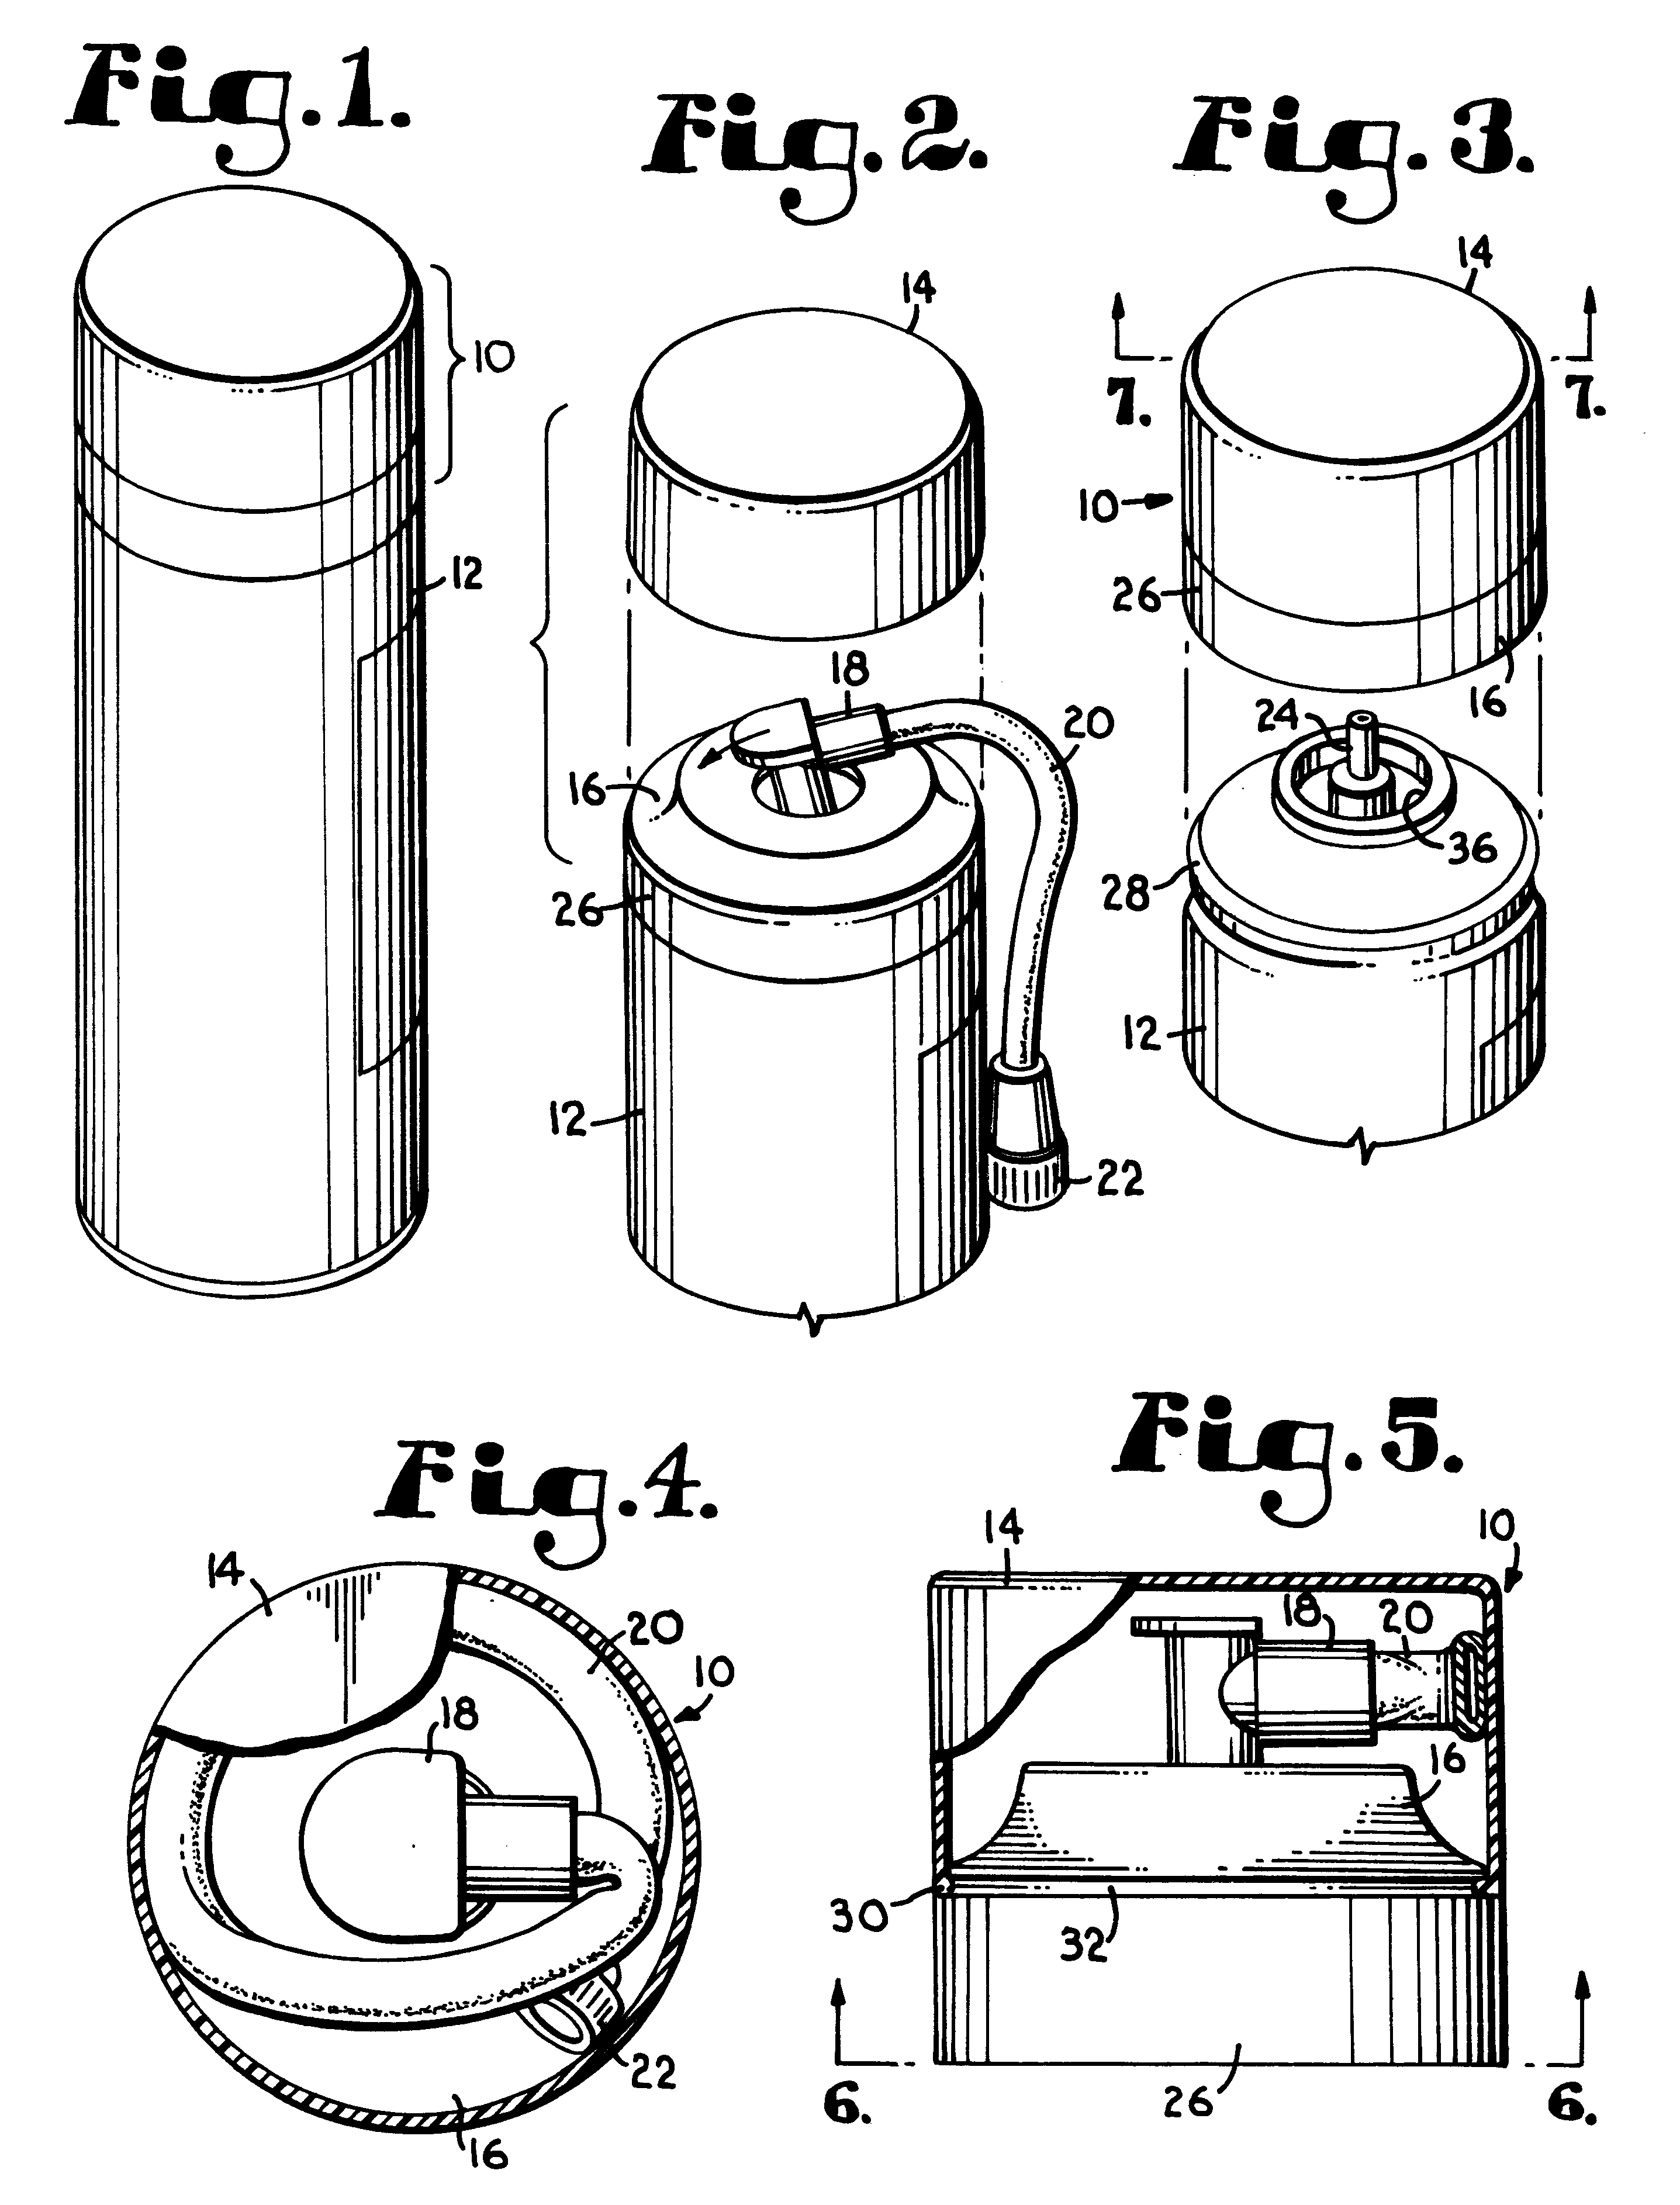 Self-contained hose assembly for a pressurized canister